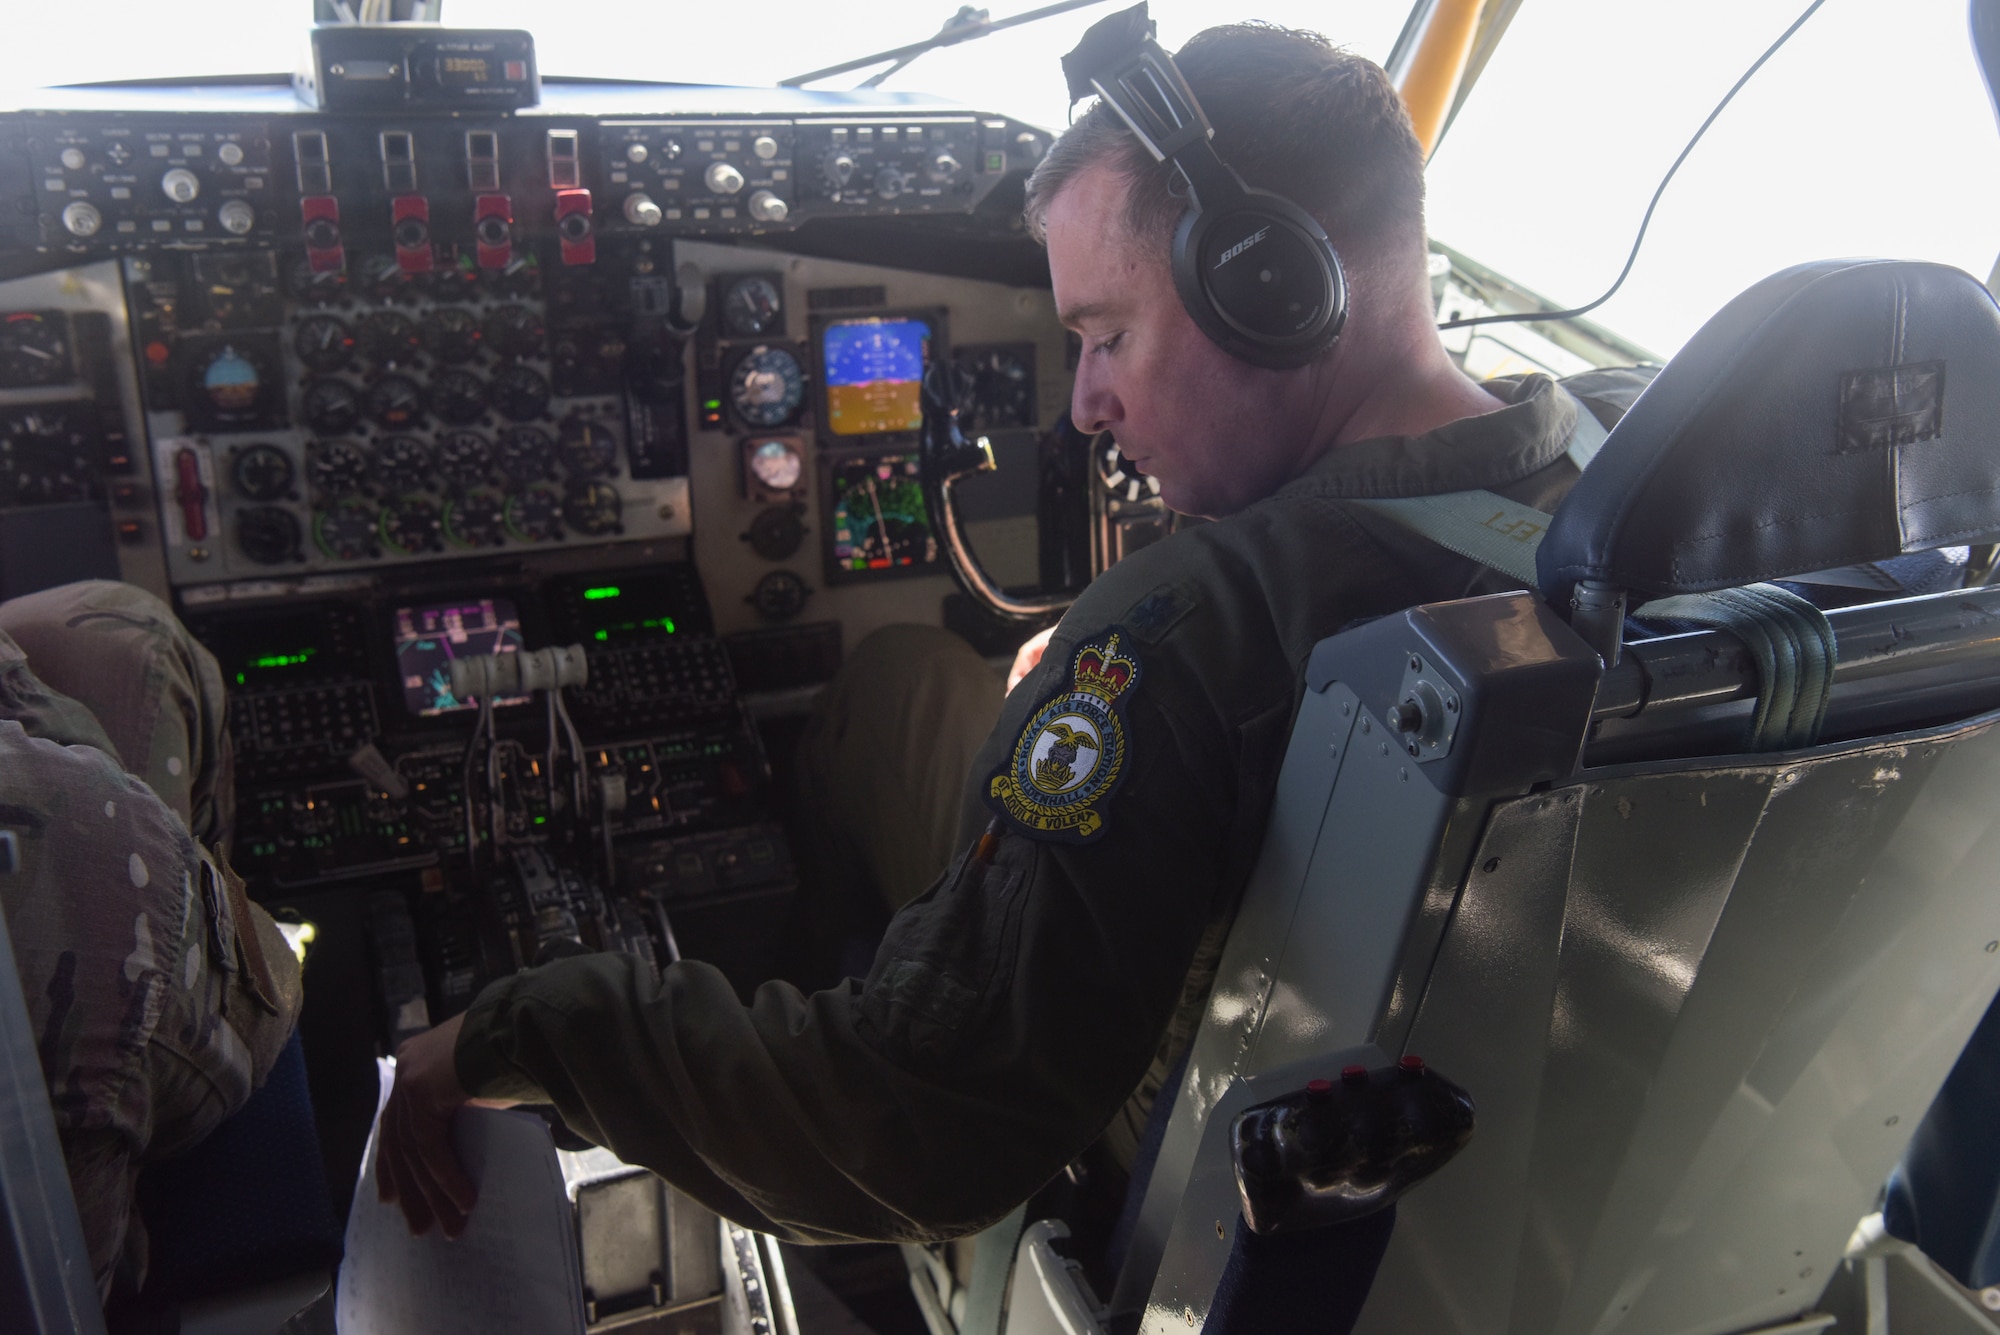 U.S. Air Force Lt. Col. Christopher Reid, 100th Operations Support Squadron director of operations, performs aerial refueling checklist during Exercise Baltic Operations, over Germany, June 12, 2019. BALTOPS, currently in its 47th year, is an annual, multinational exercise that brings together a robust professional constellation of allies and partners to conduct operations in support of favorable regional balances of power that safeguard security, prosperity and the free and open international order. (U.S. Air Force photo by Senior Airman Alexandria Lee)